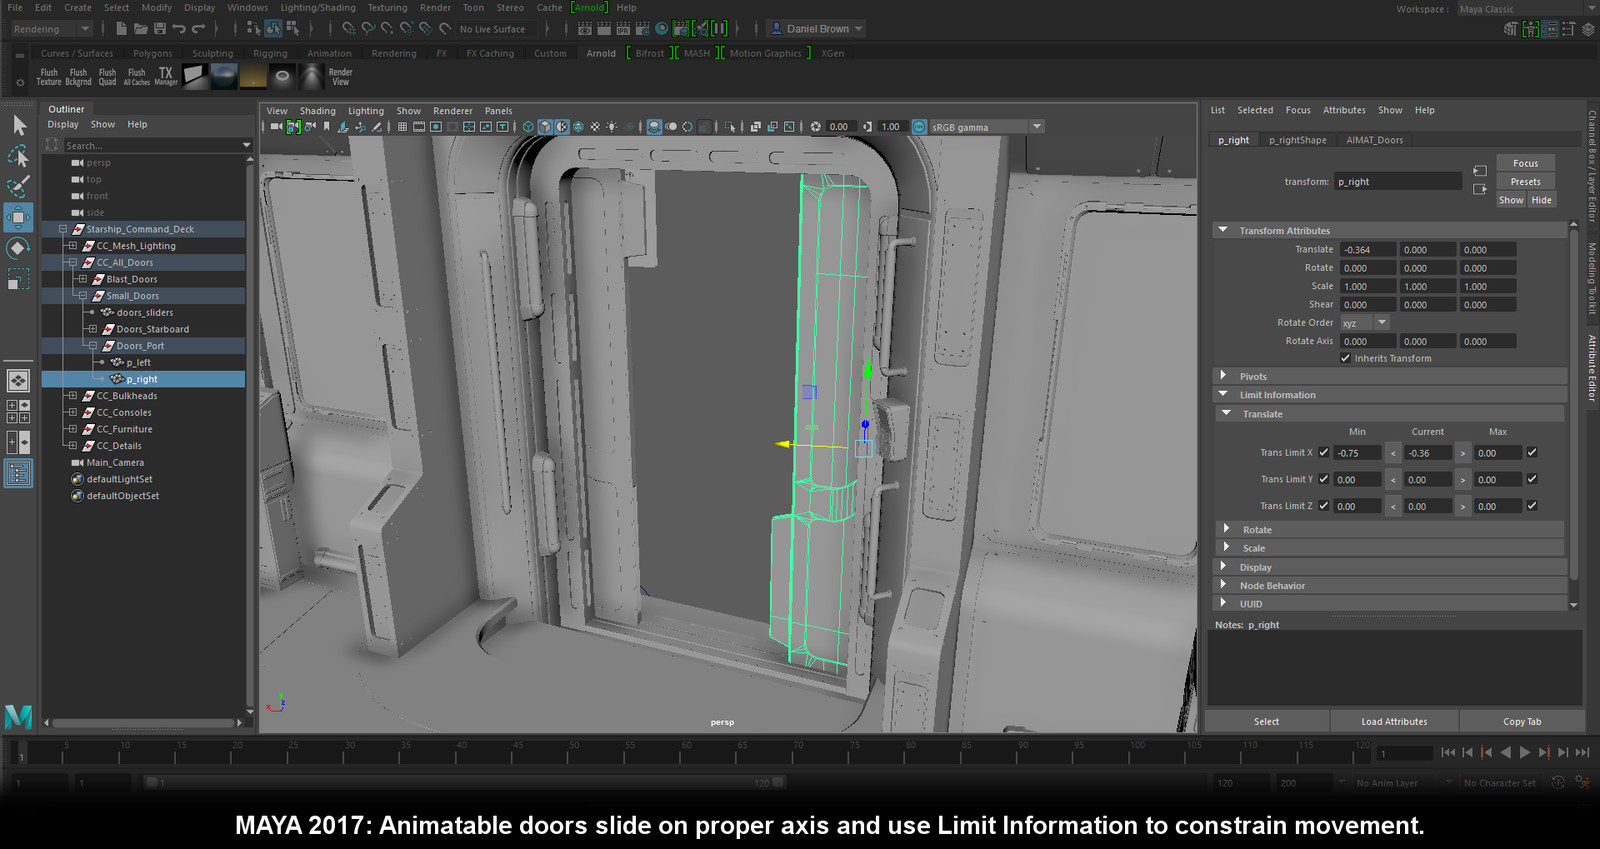 Maya 2017 version constraints for animating the small doors